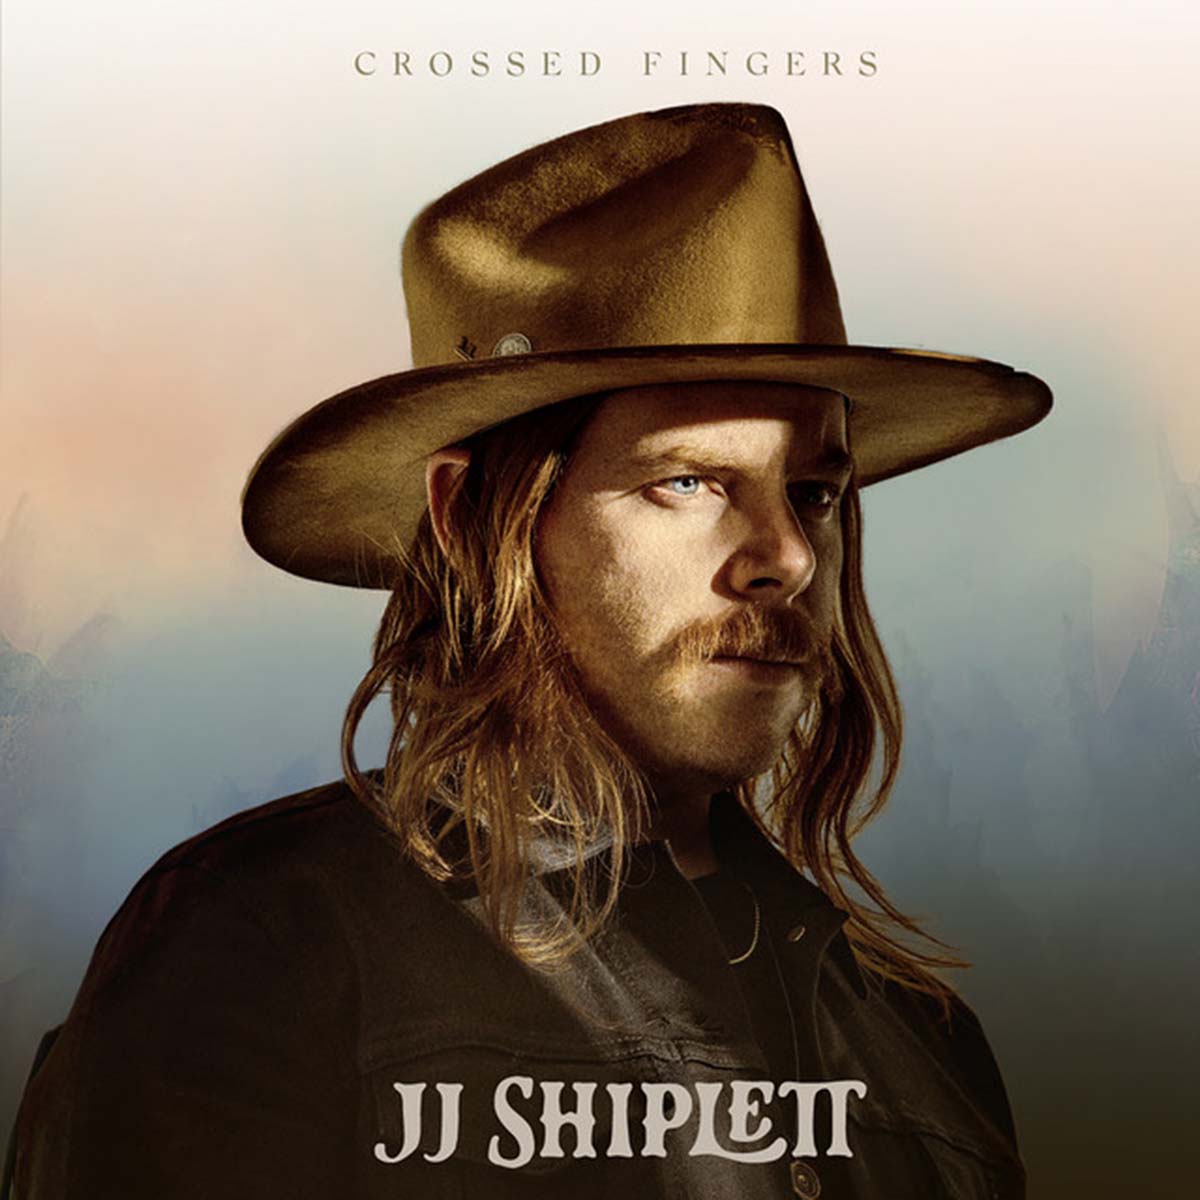 Country Star JJ Shiplett Re-Imagines Previous Album with Crossed Fingers Re-Make